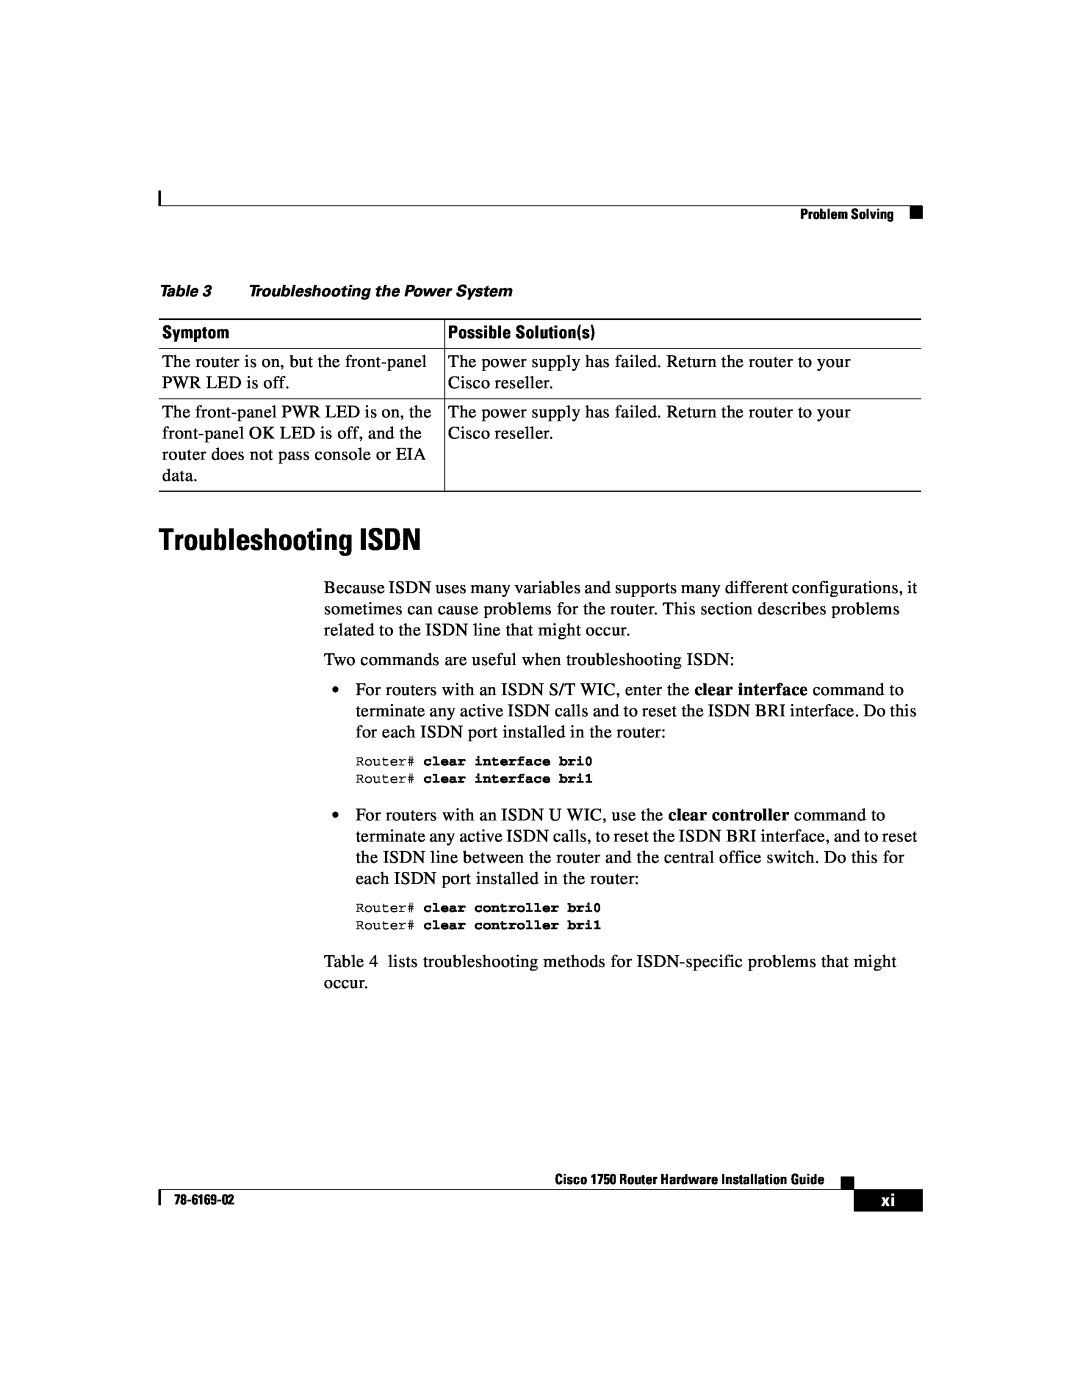 Cisco Systems CISCO1750 manual Troubleshooting ISDN, Troubleshooting the Power System 